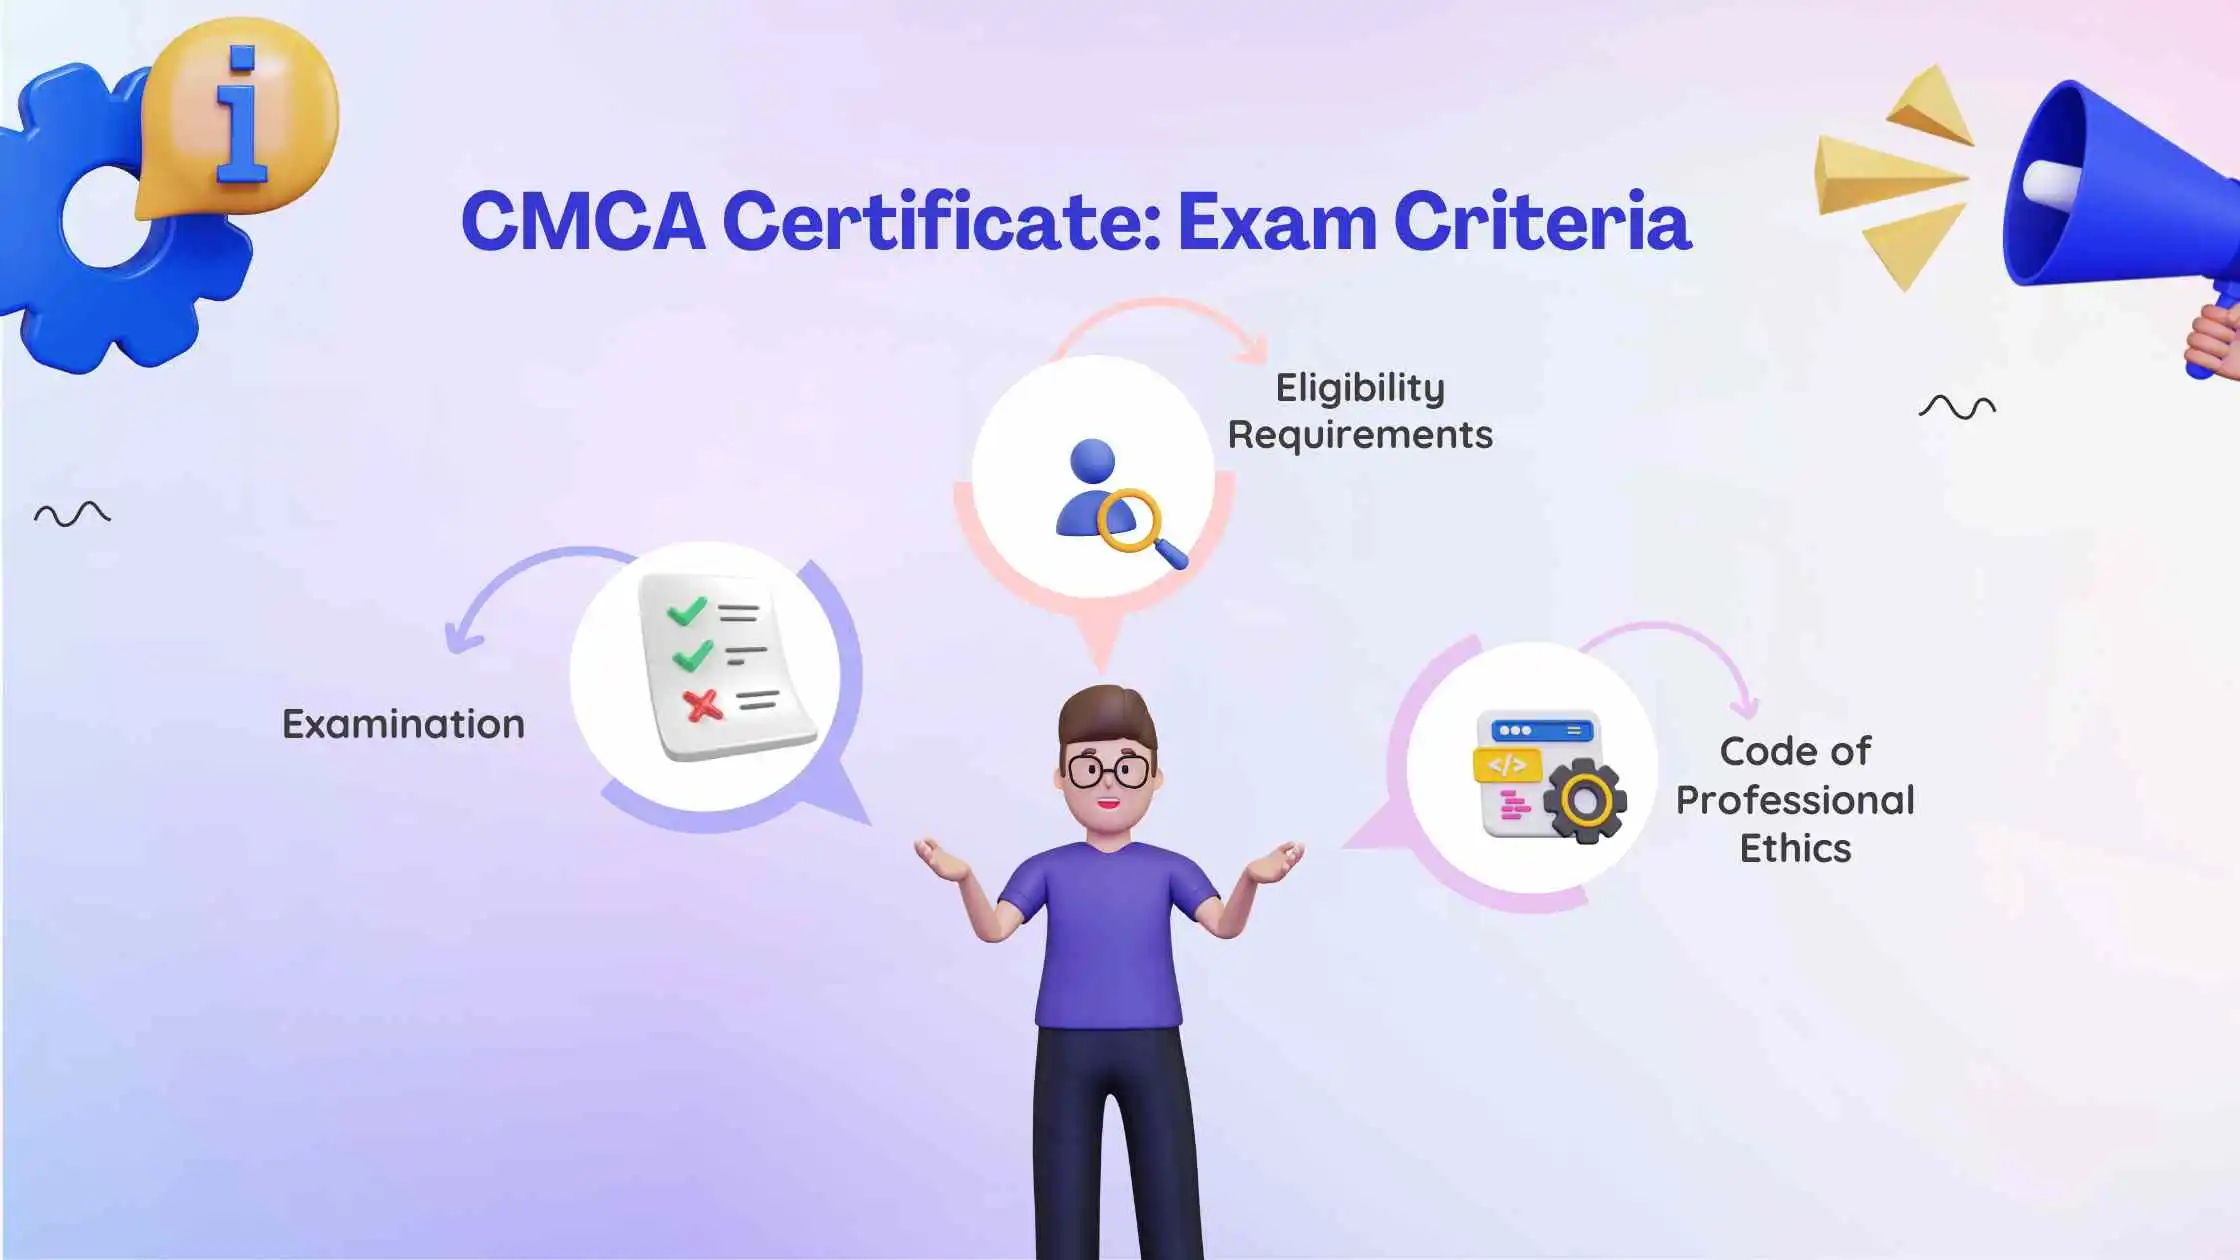 How to Obtain CMCA Certificate